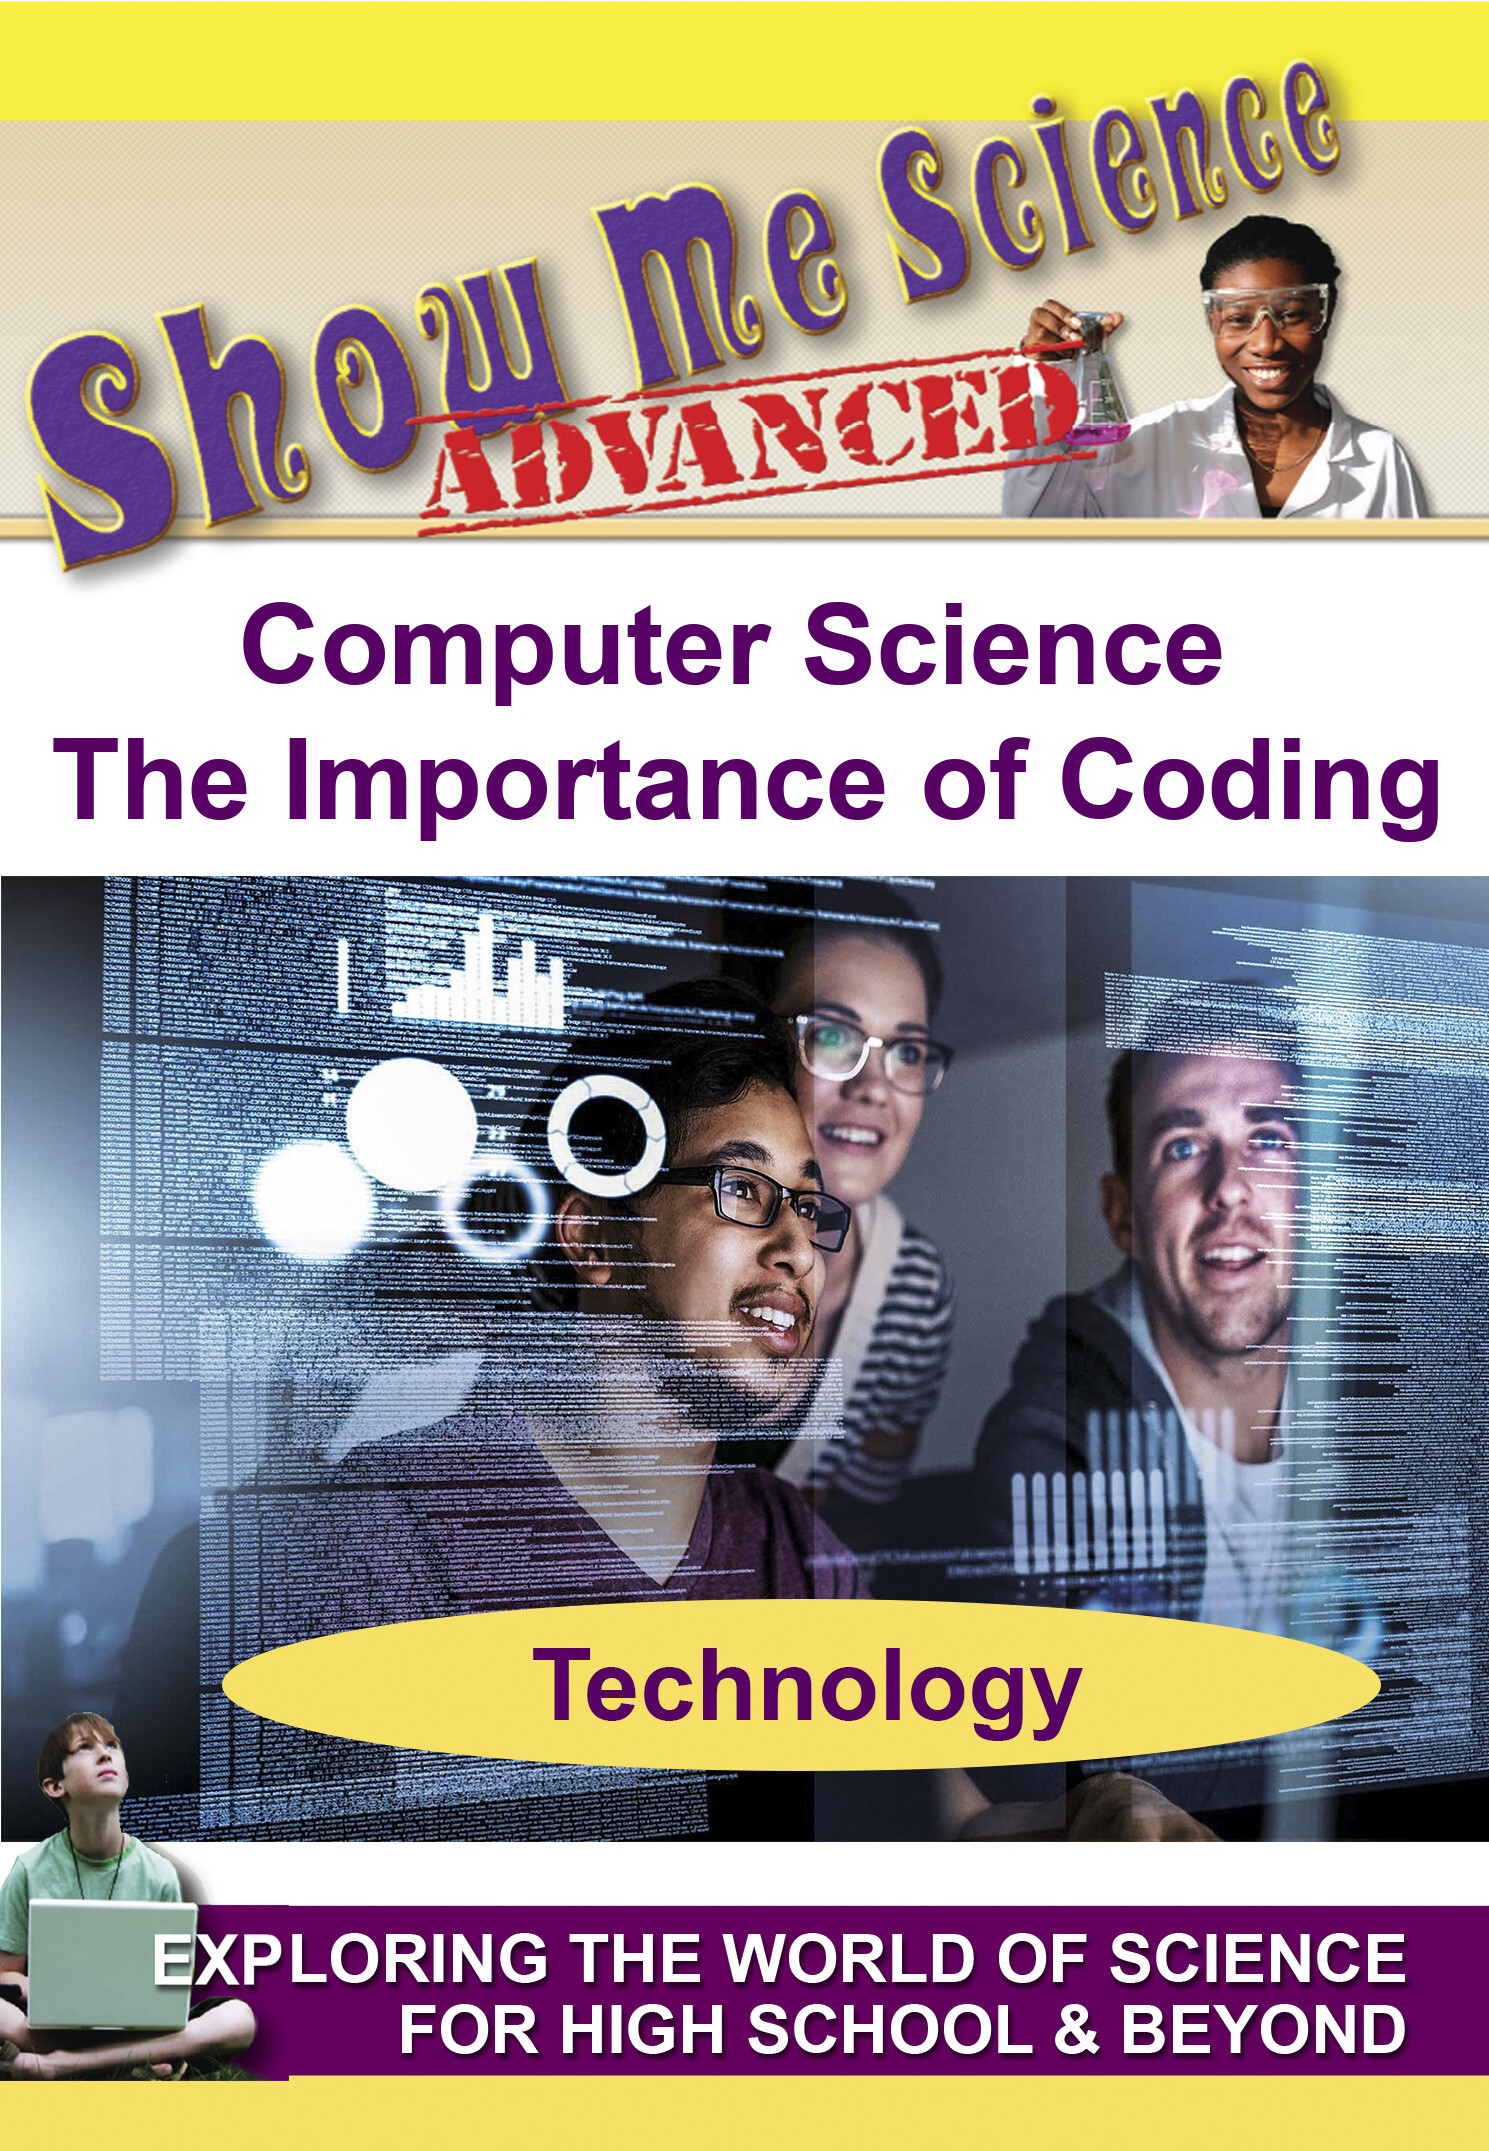 K4685 - Computer Science The Importance of Coding